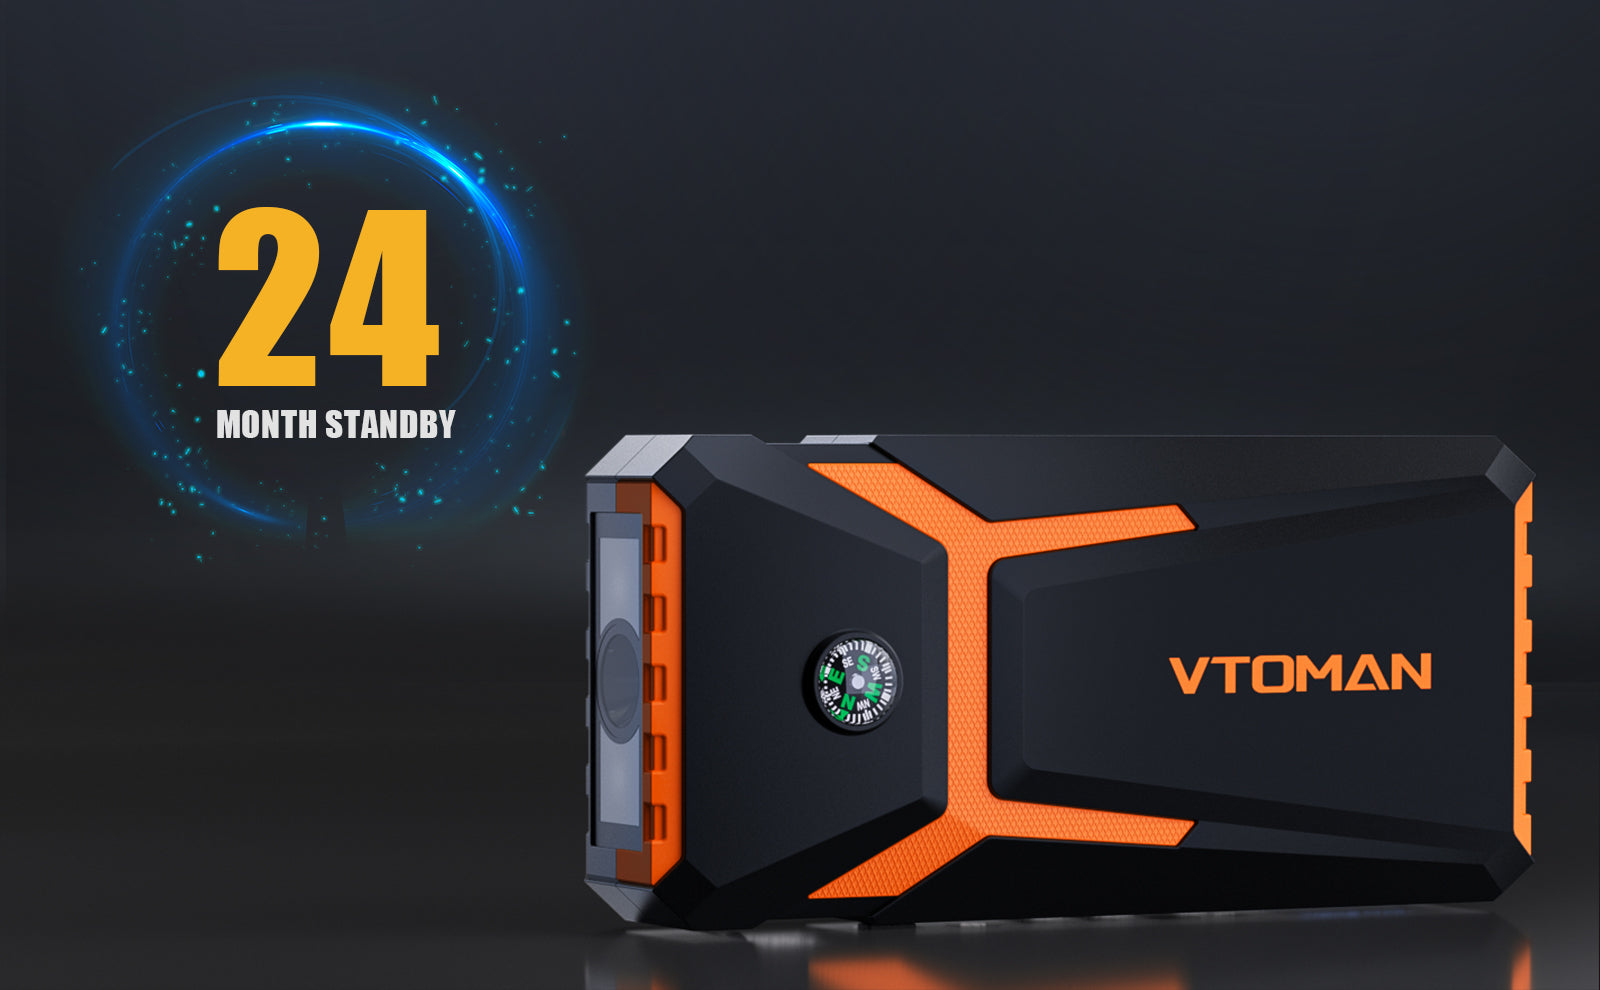 The V8 Pro jump starter automatically shuts down after 10 seconds, while jump starters and battery chargers enter standby mode to conserve power for up to 24 months